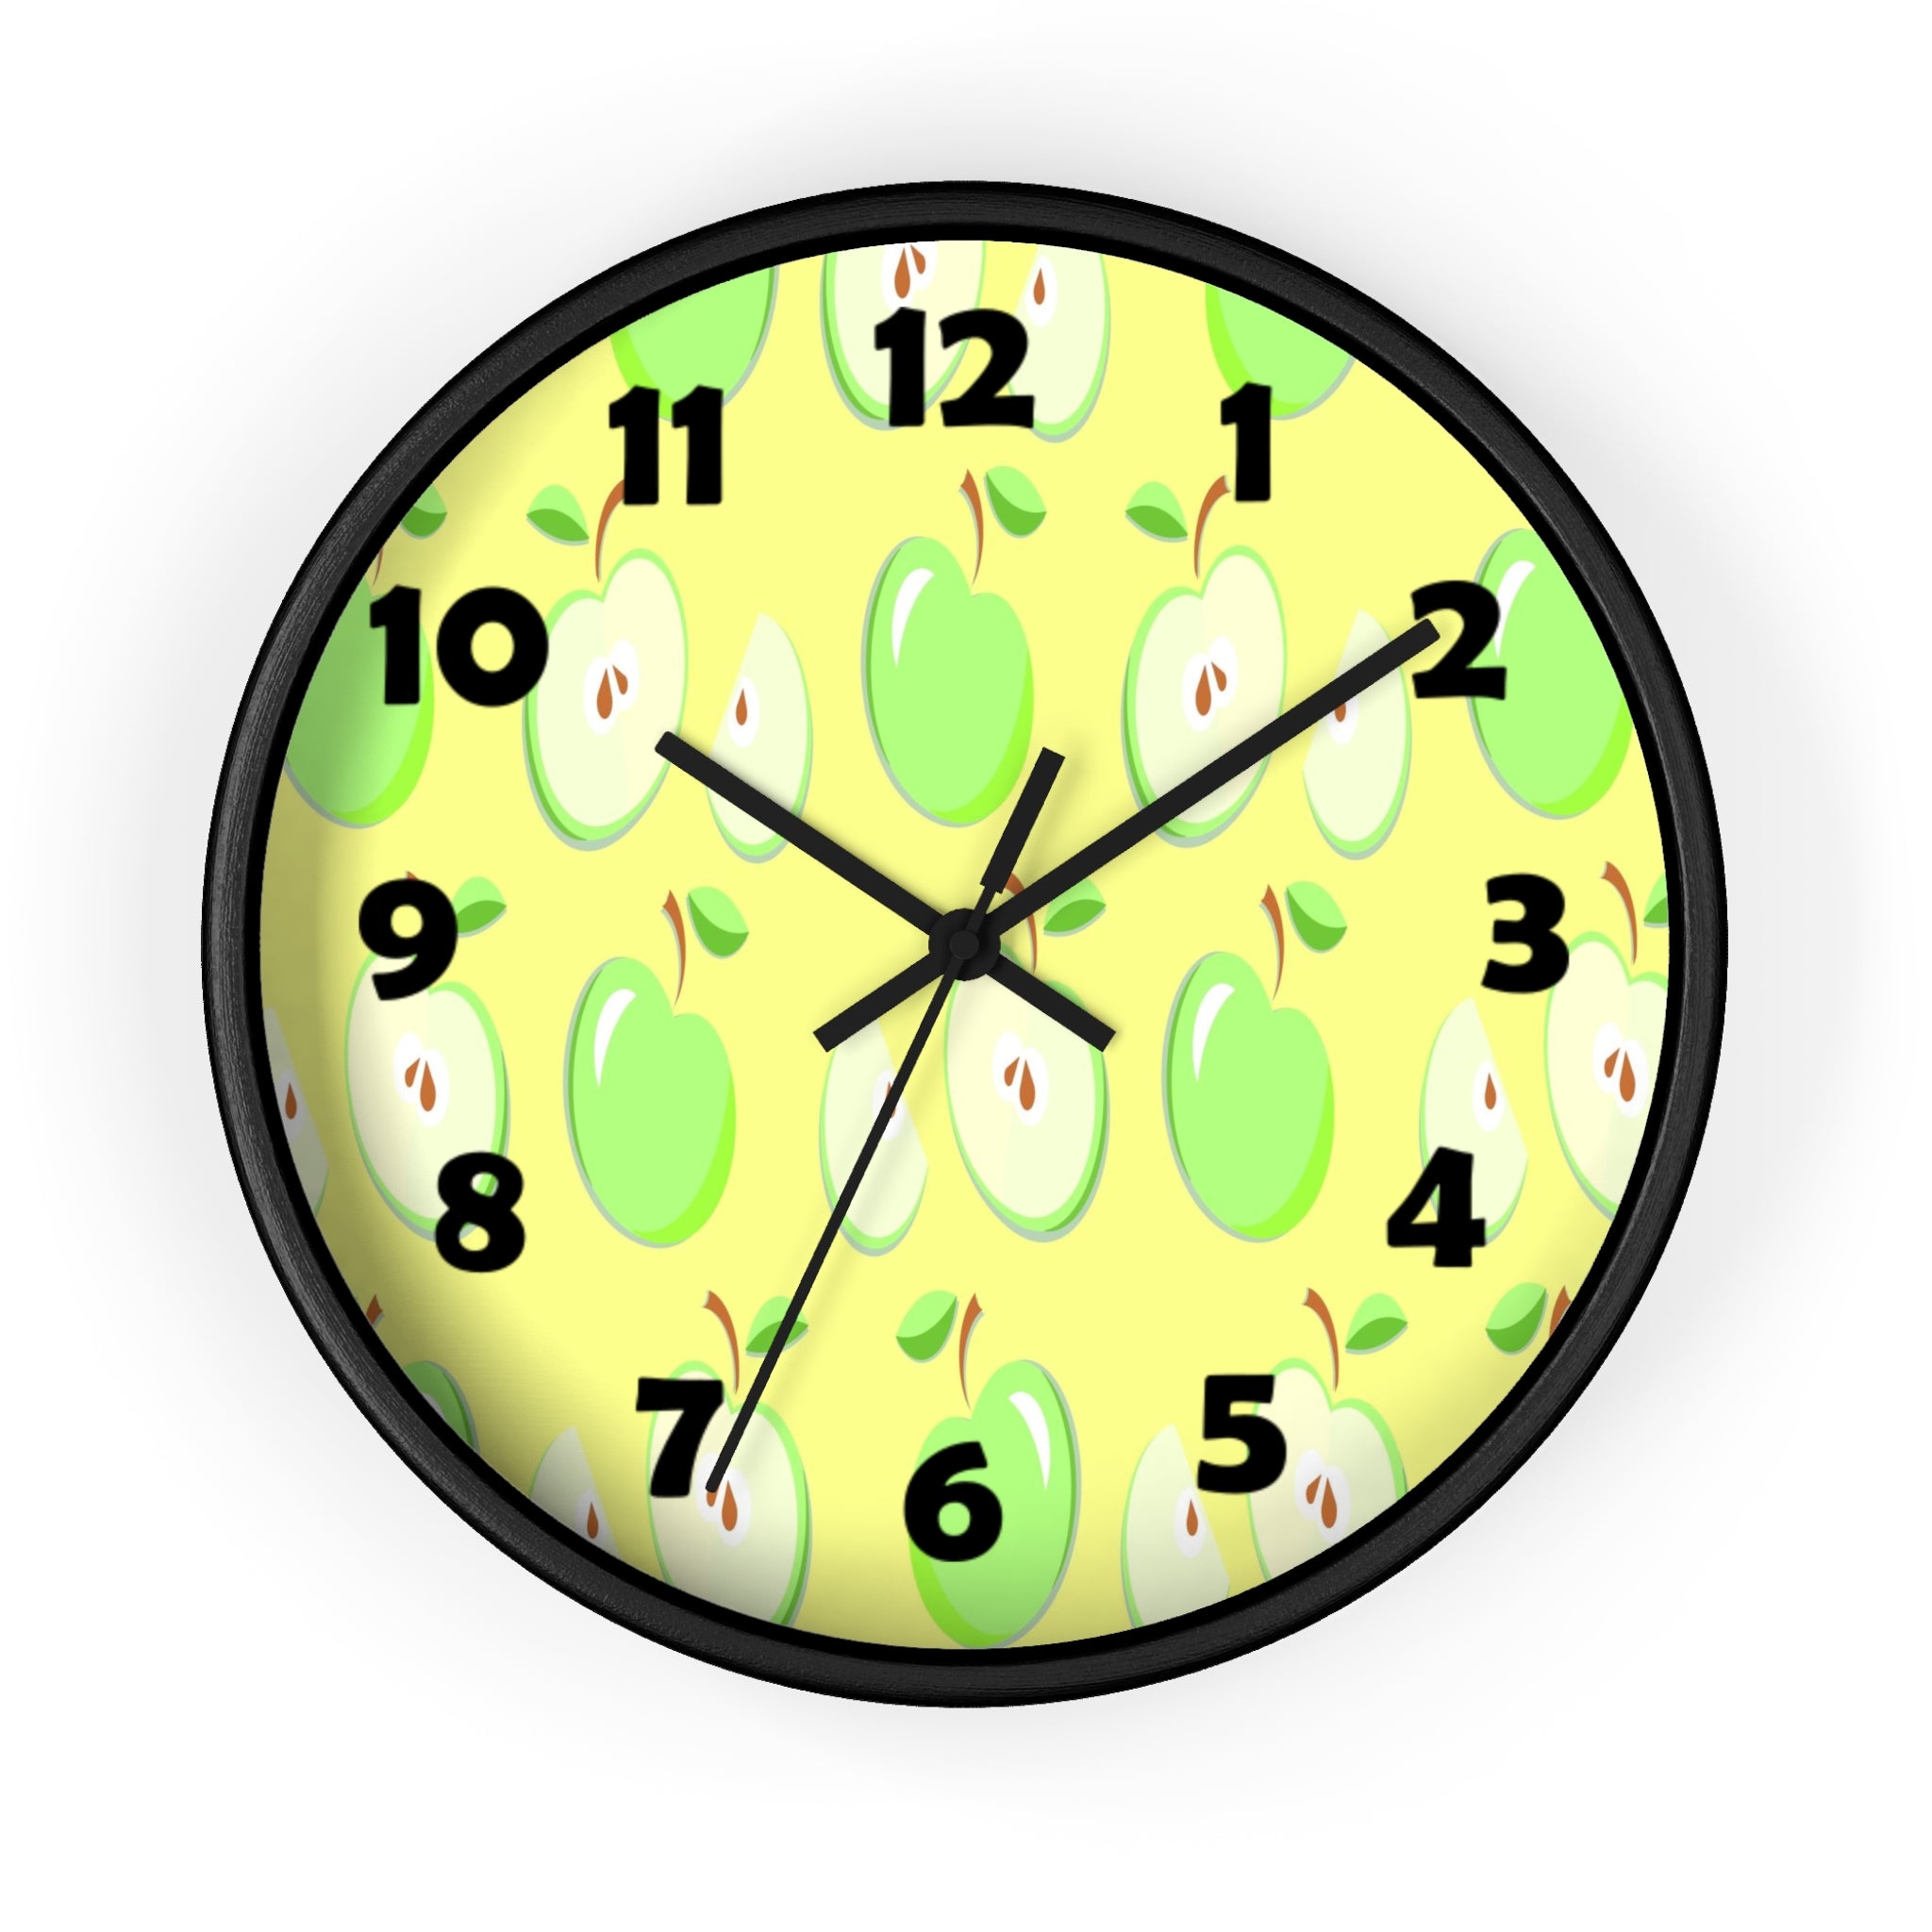 10 inch round wall clock with green apples design